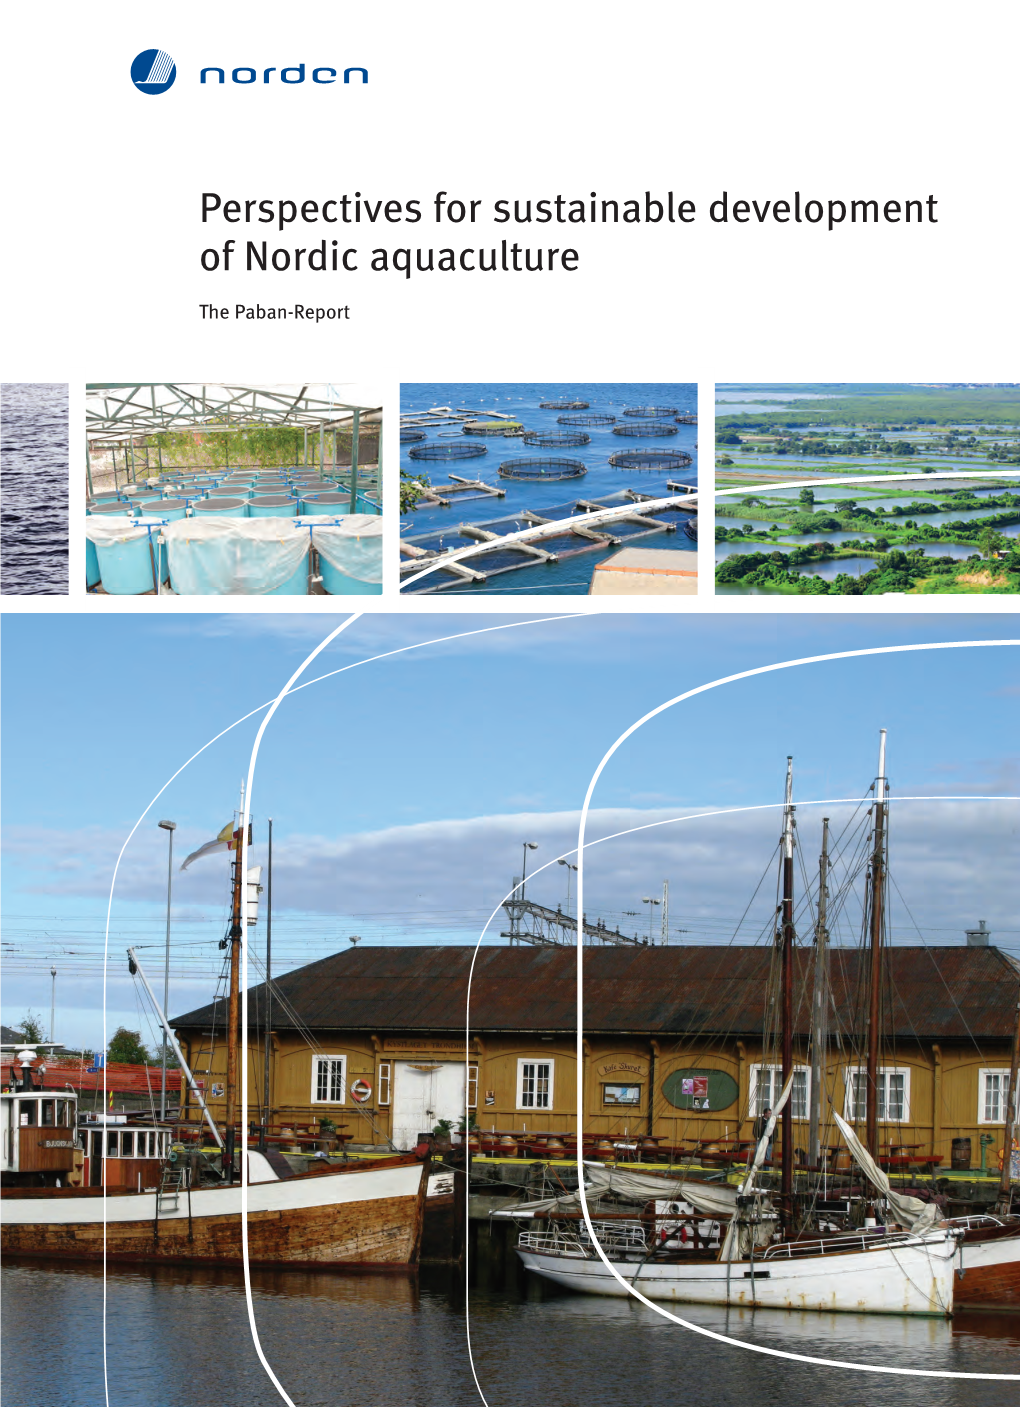 Perspectives for Sustainable Development of Nordic Aquaculture